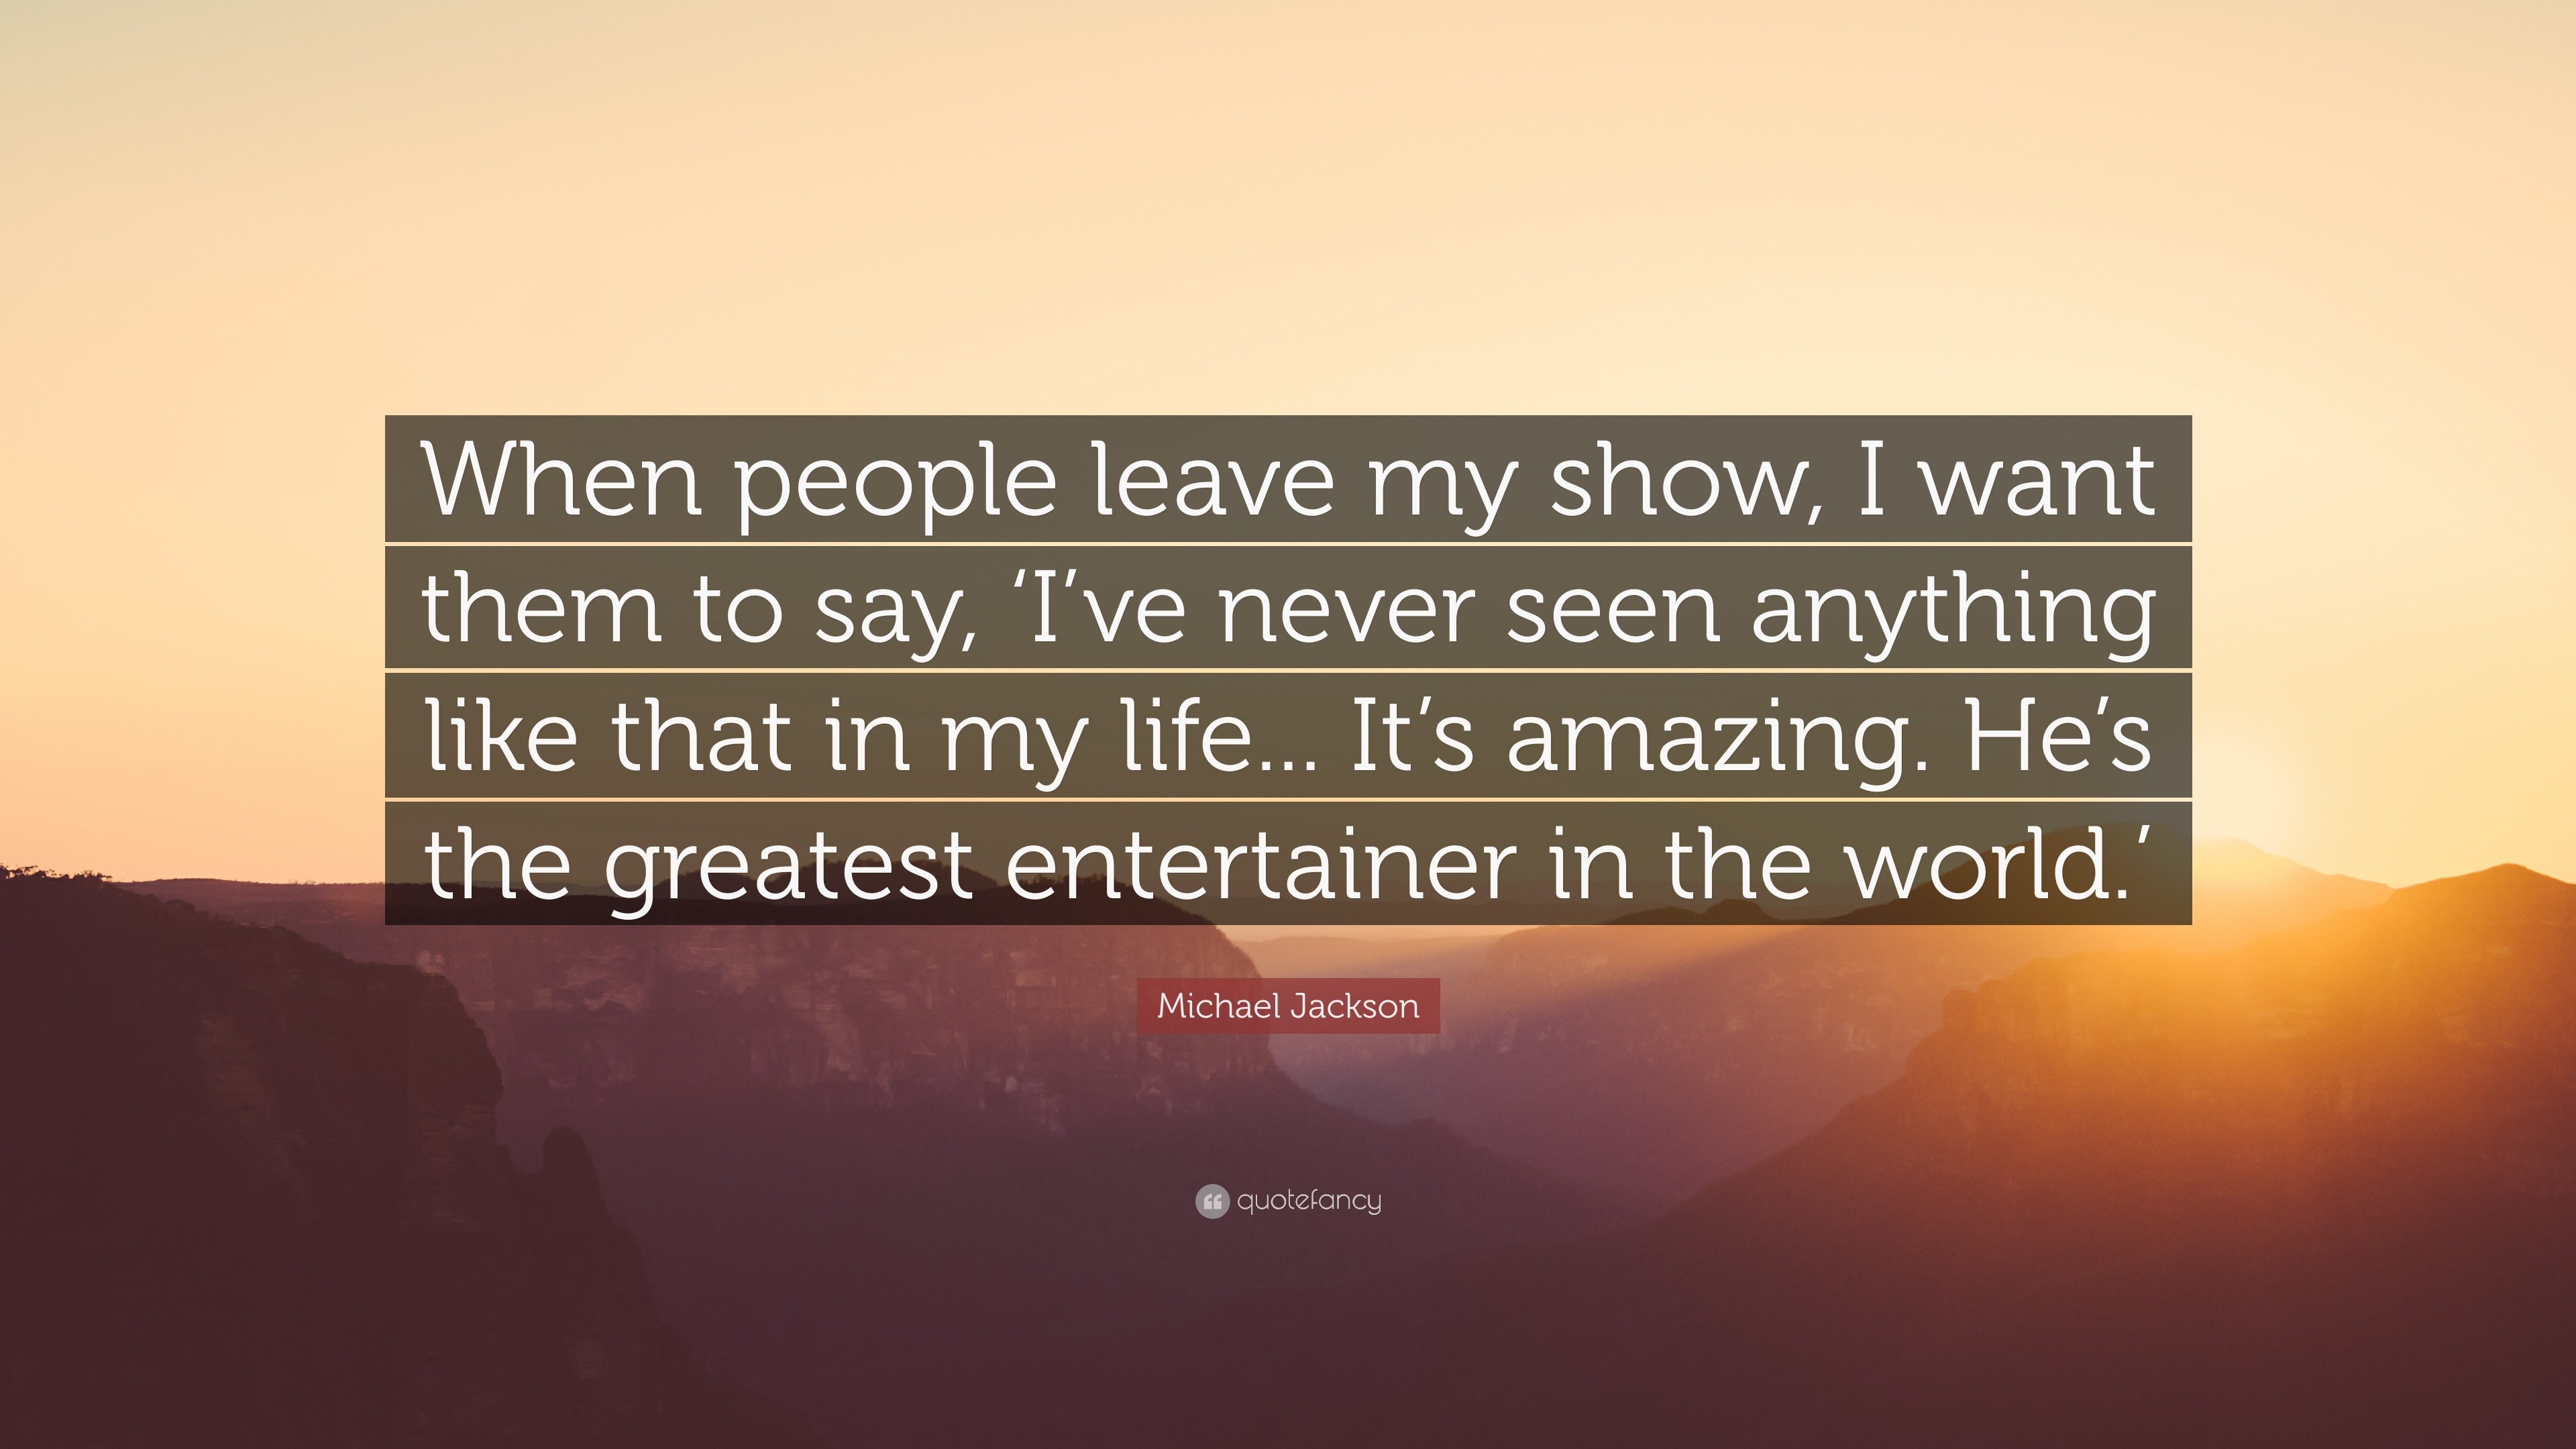 Michael Jackson Quote “When people leave my show I want them to say